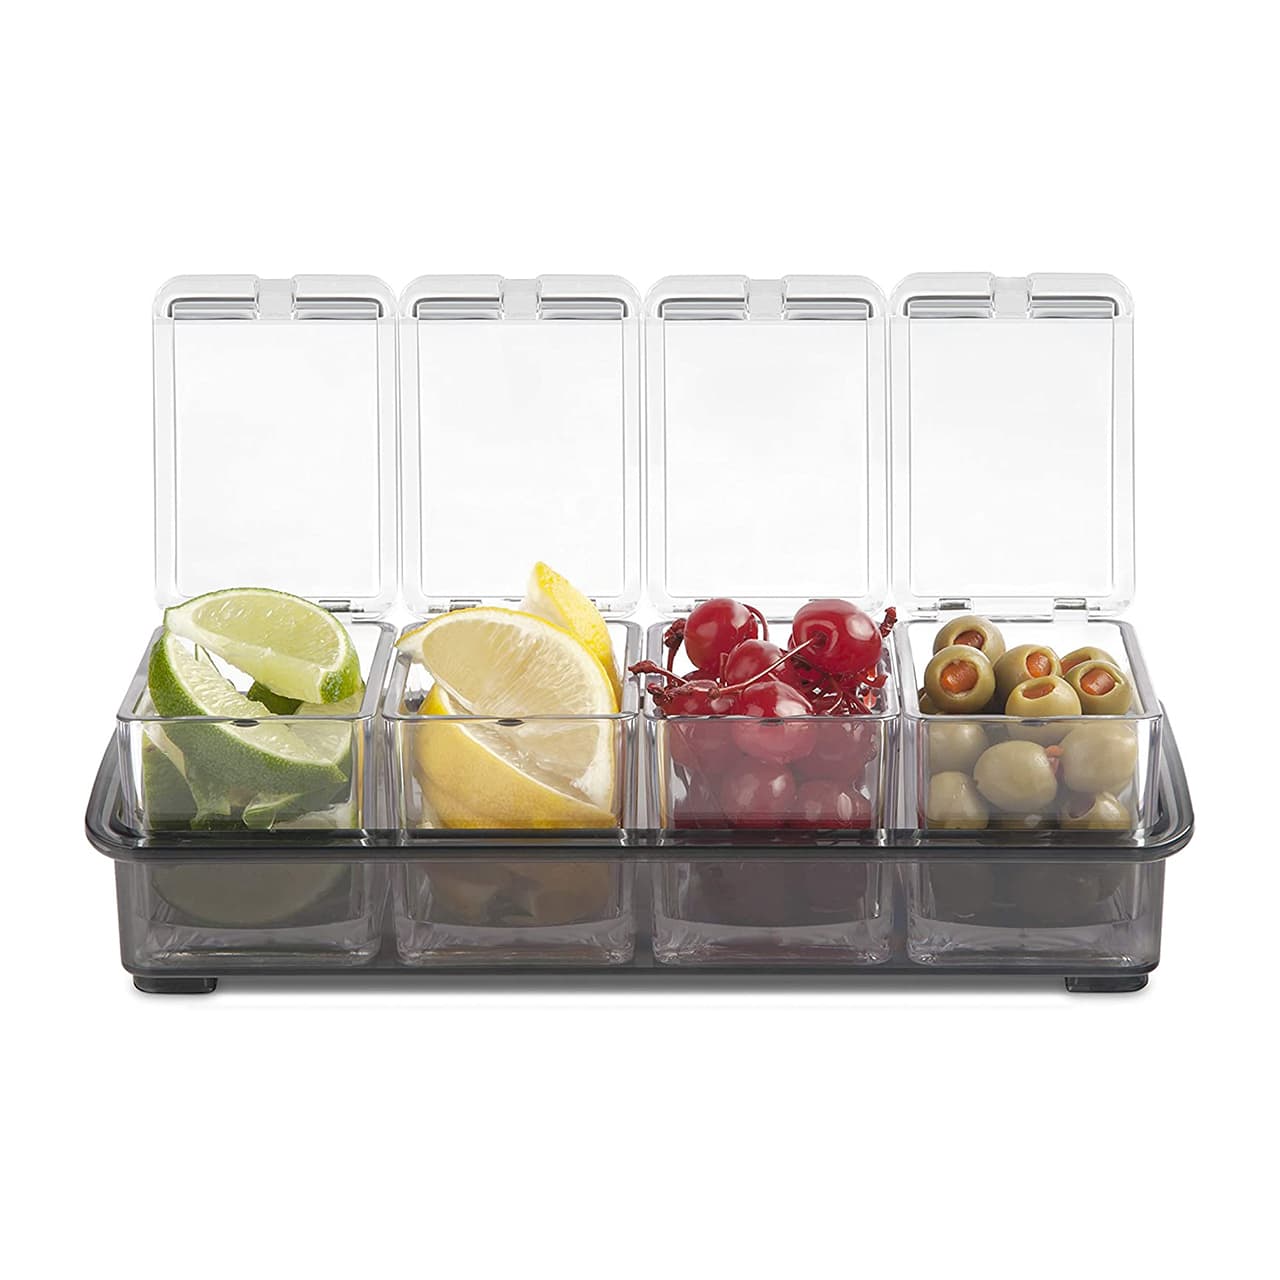 Condiment Dispenser Holder with 4 Compartments